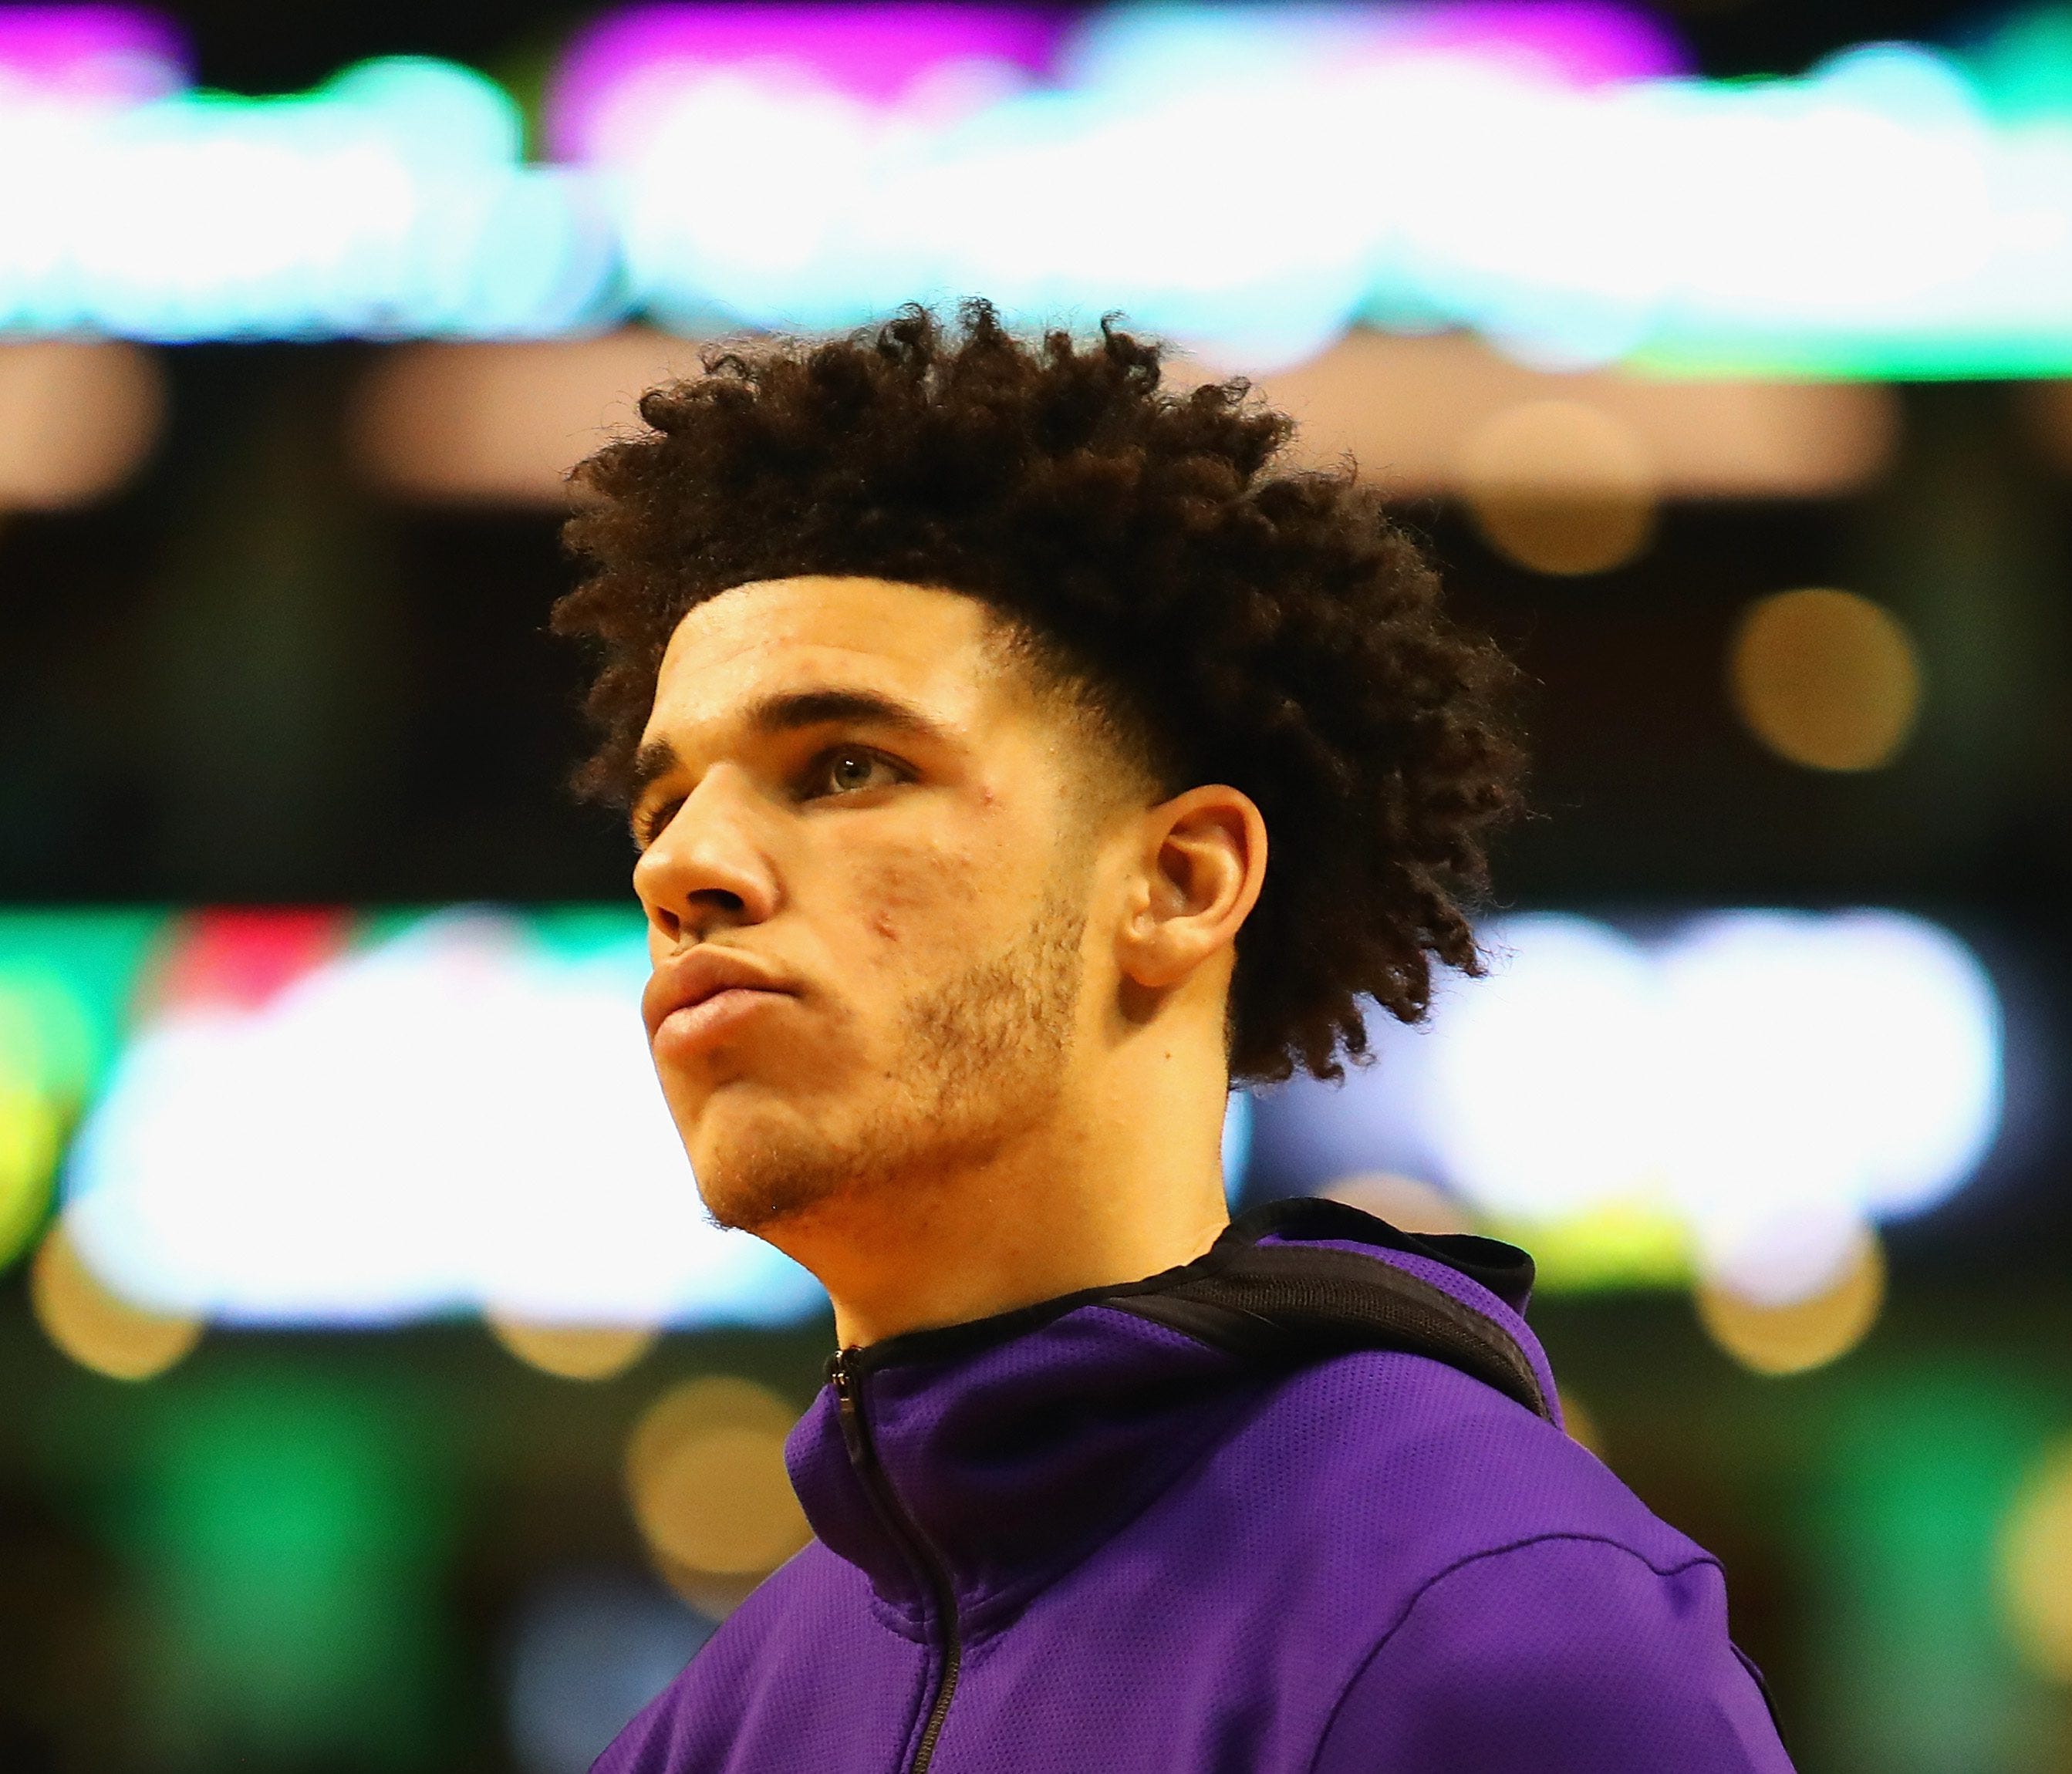 BOSTON, MA - NOVEMBER 08:  Lonzo Ball #2 of the Los Angeles Lakers looks on before the game against the Boston Celtics at TD Garden on November 8, 2017 in Boston, Massachusetts.  (Photo by Tim Bradbury/Getty Images) ORG XMIT: 775026810 ORIG FILE ID: 